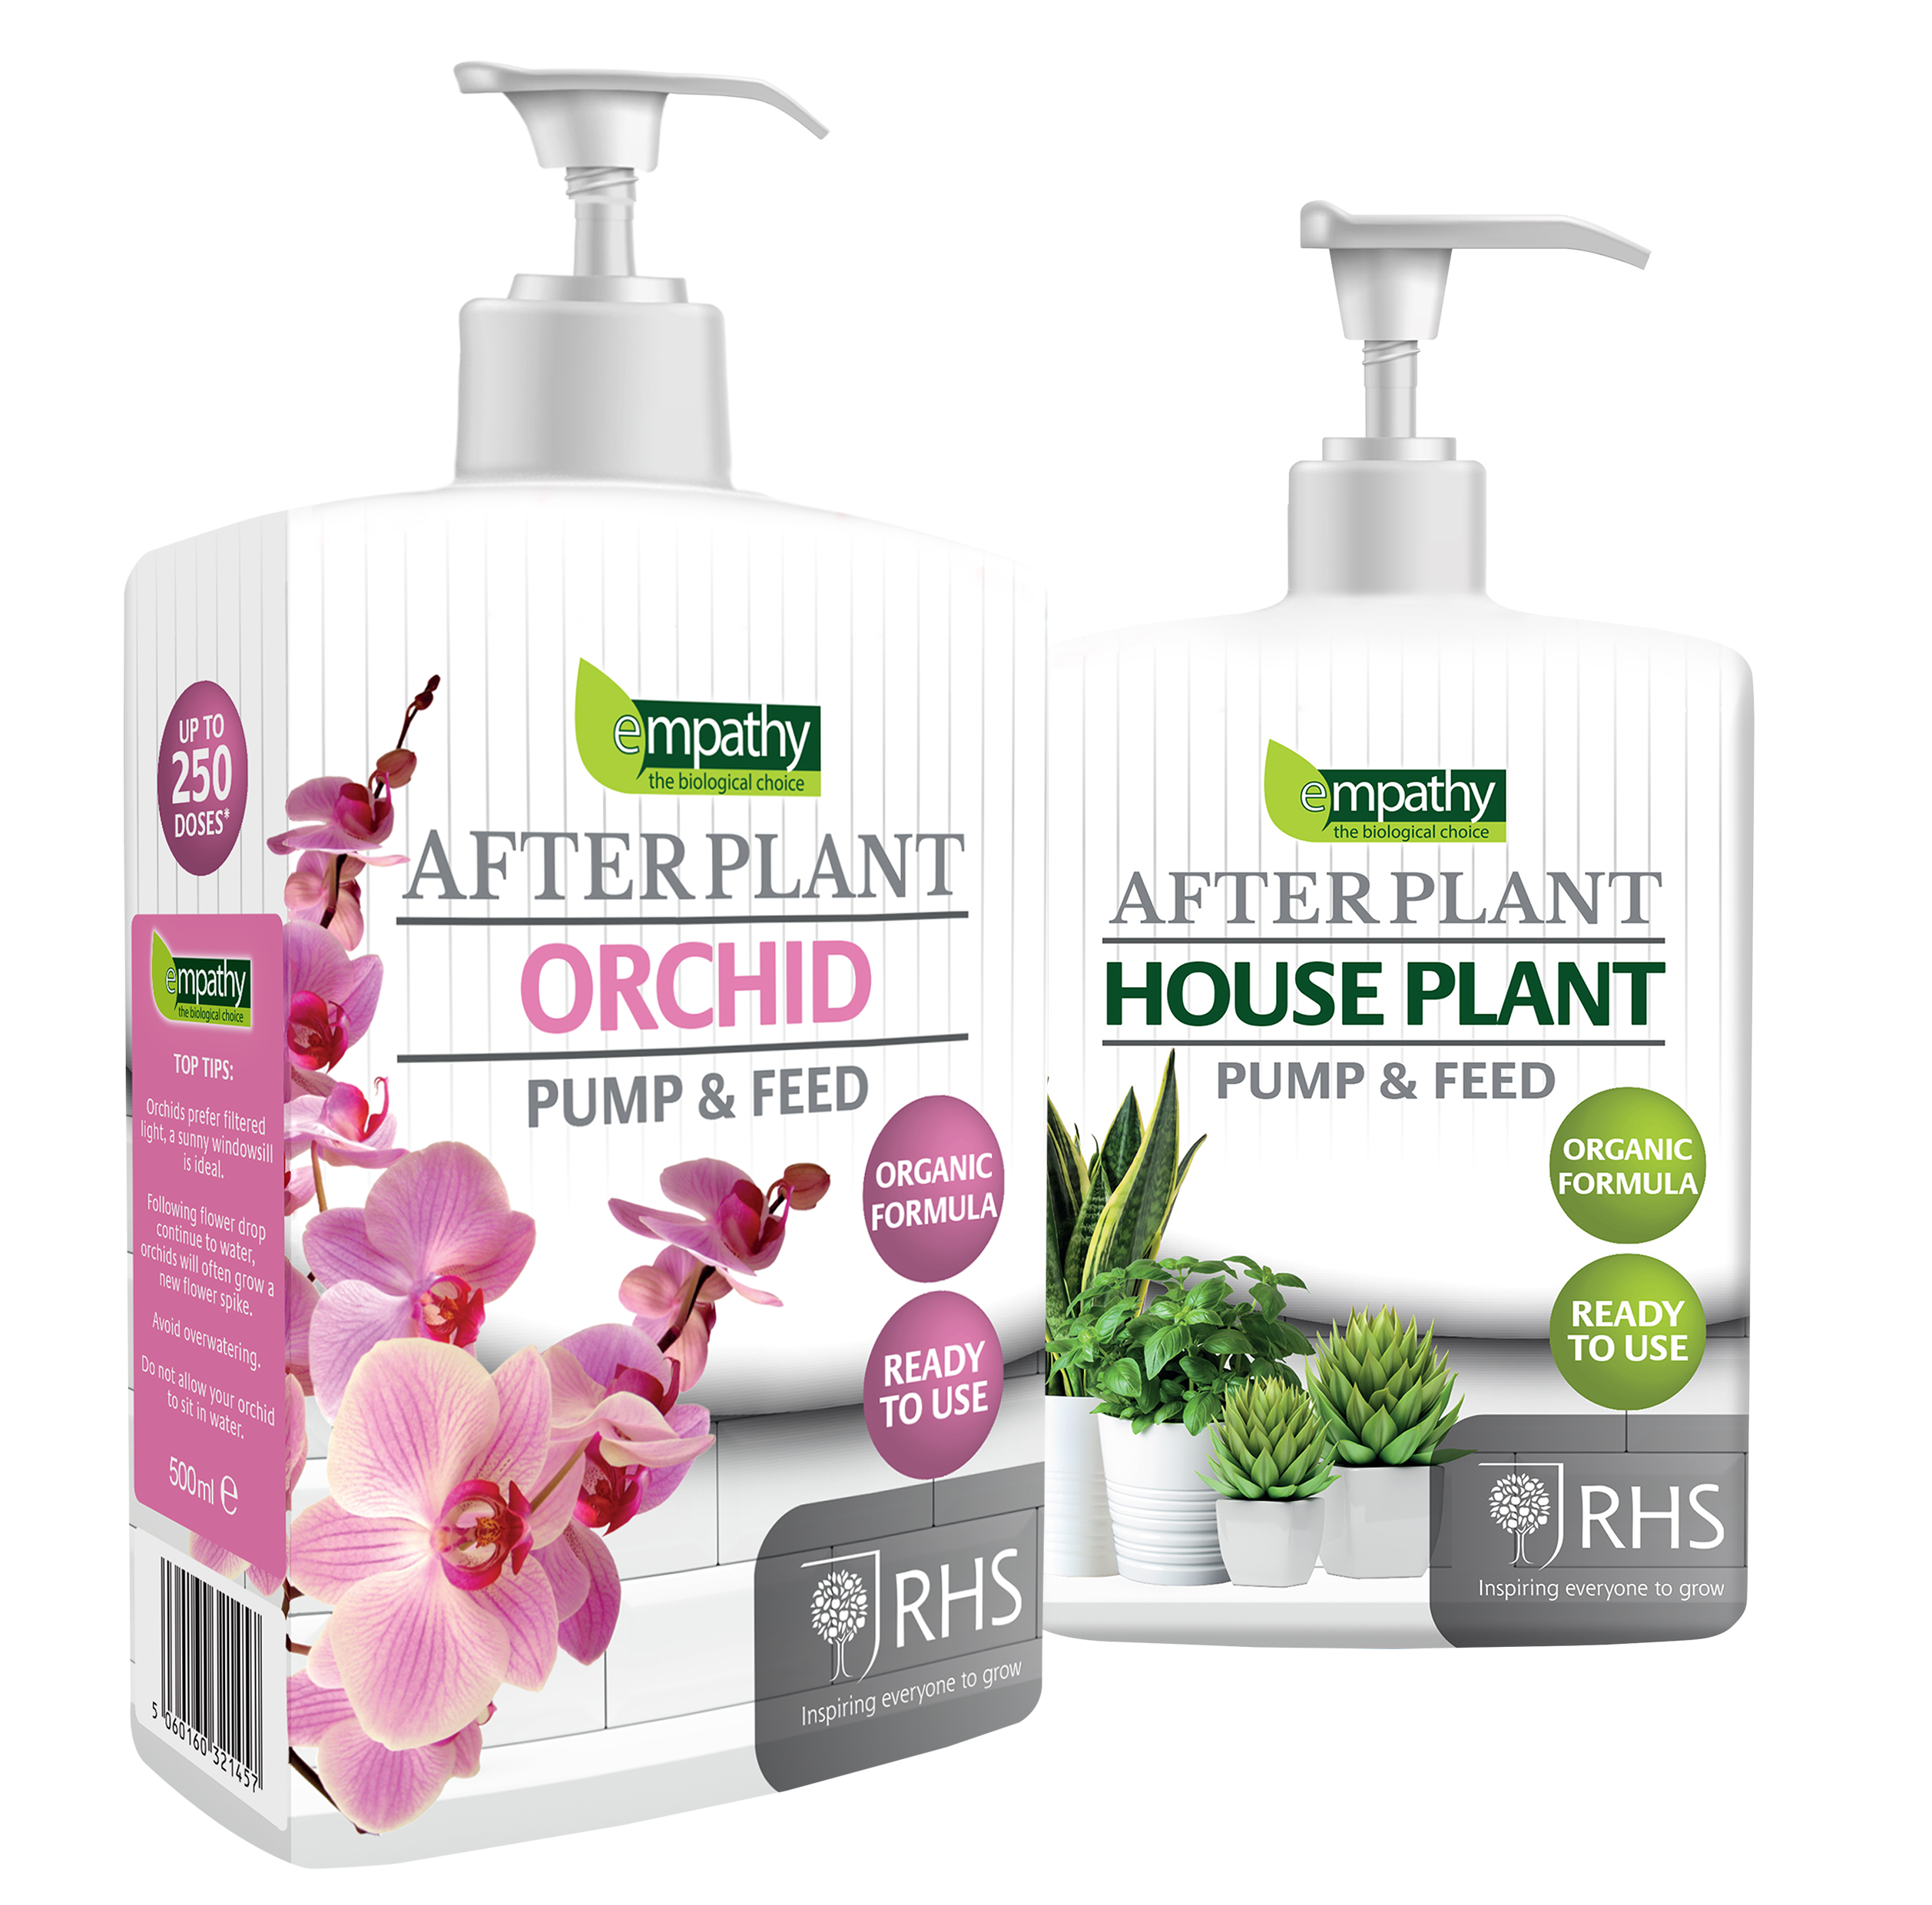 Pump and feed house plants naturally